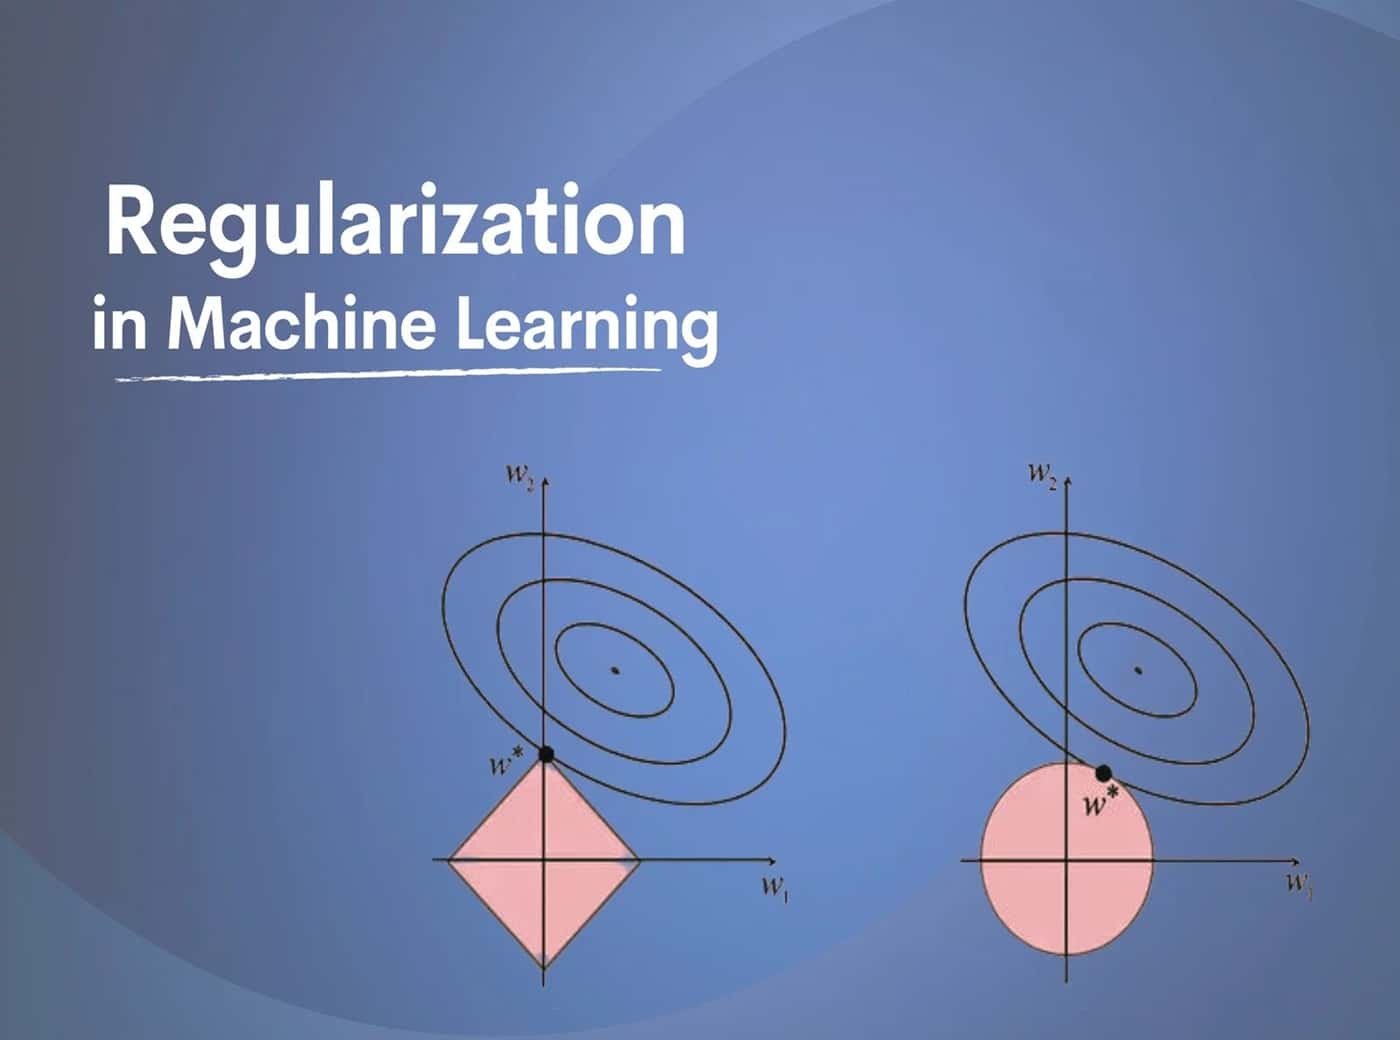 Regularization in Machine Learning: All you need to know